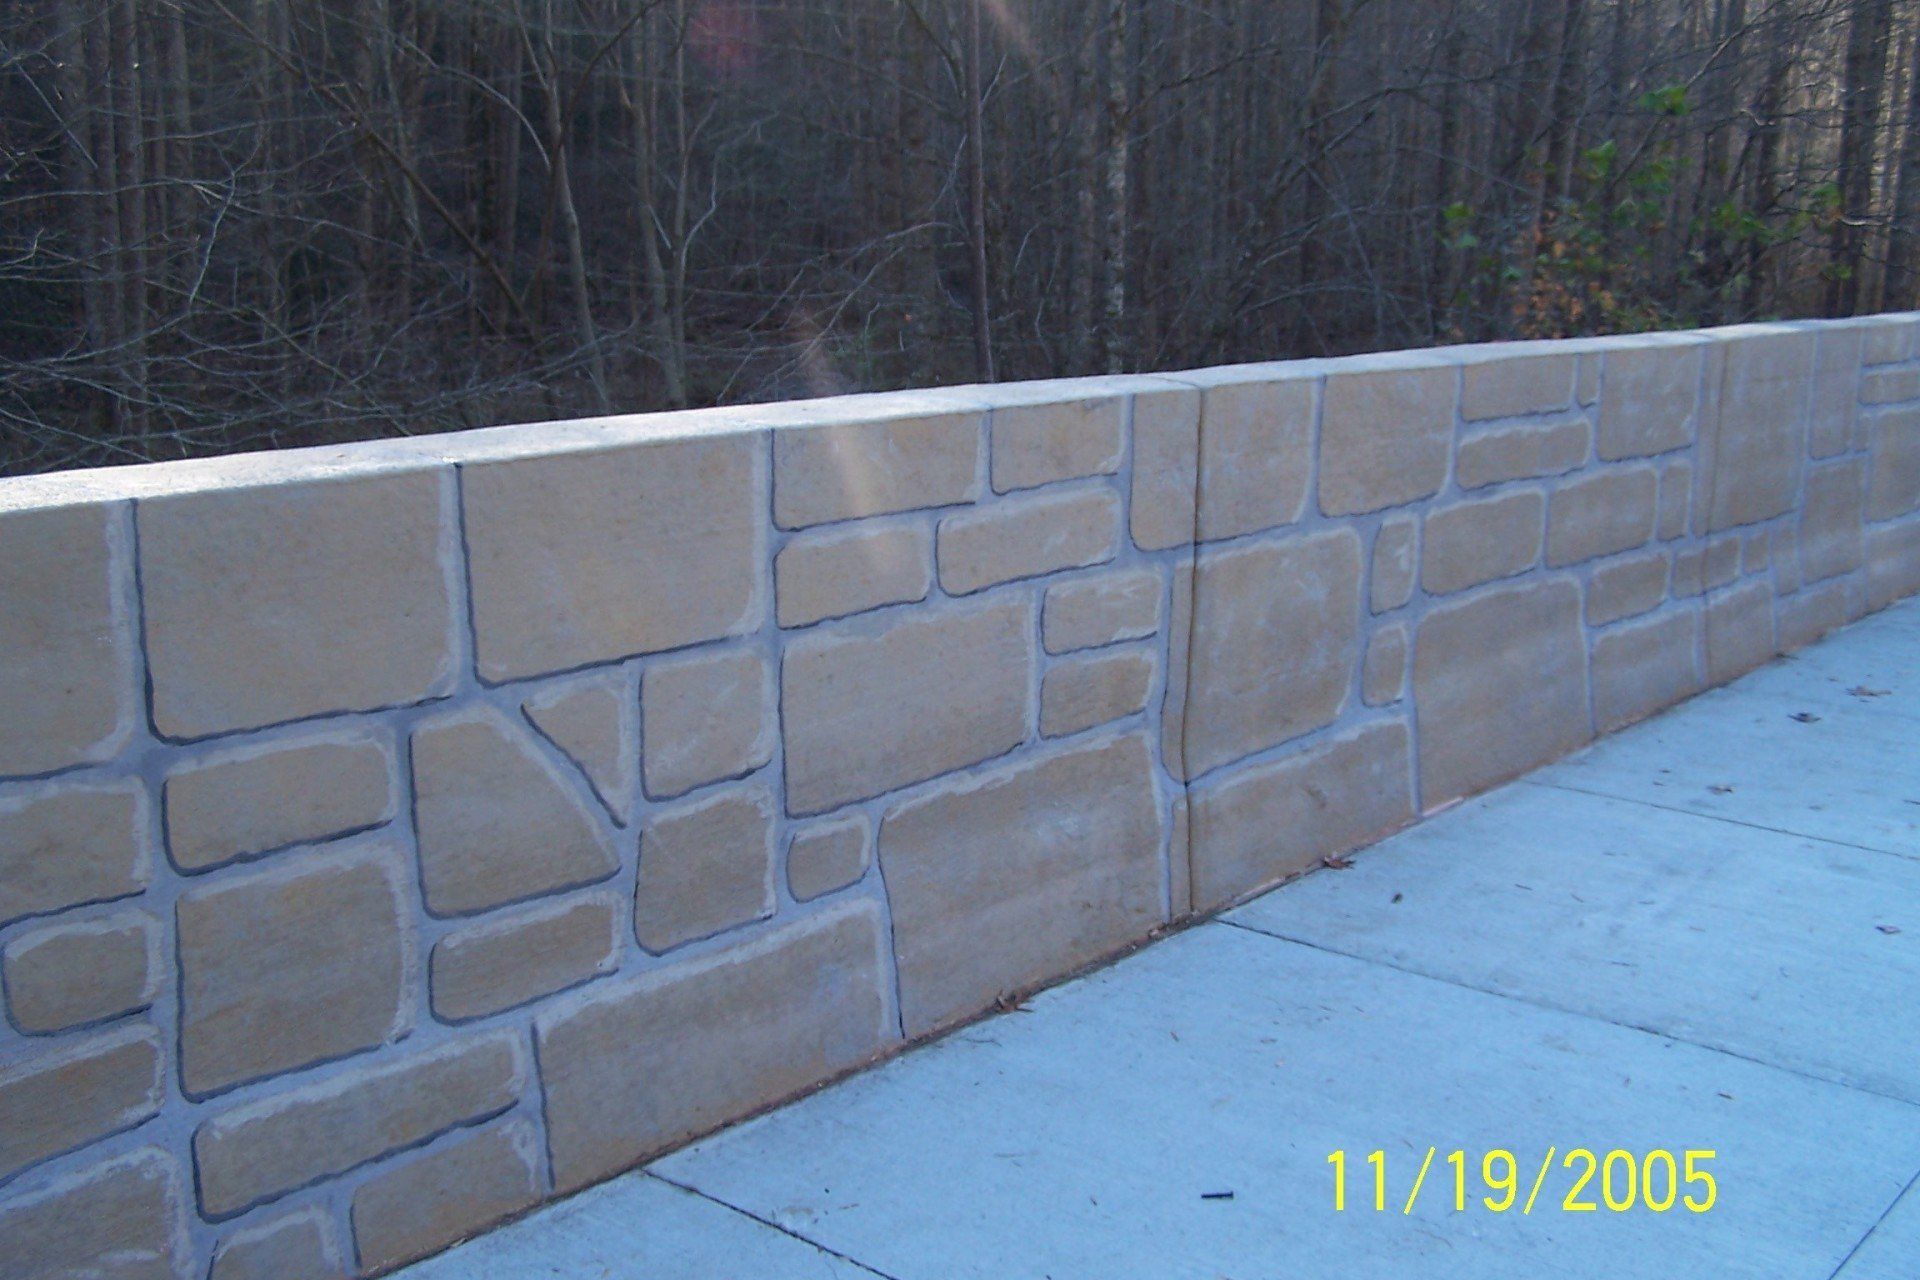 retaining and parapet walls on the side of the roads in Gatlinburg, Tennessee